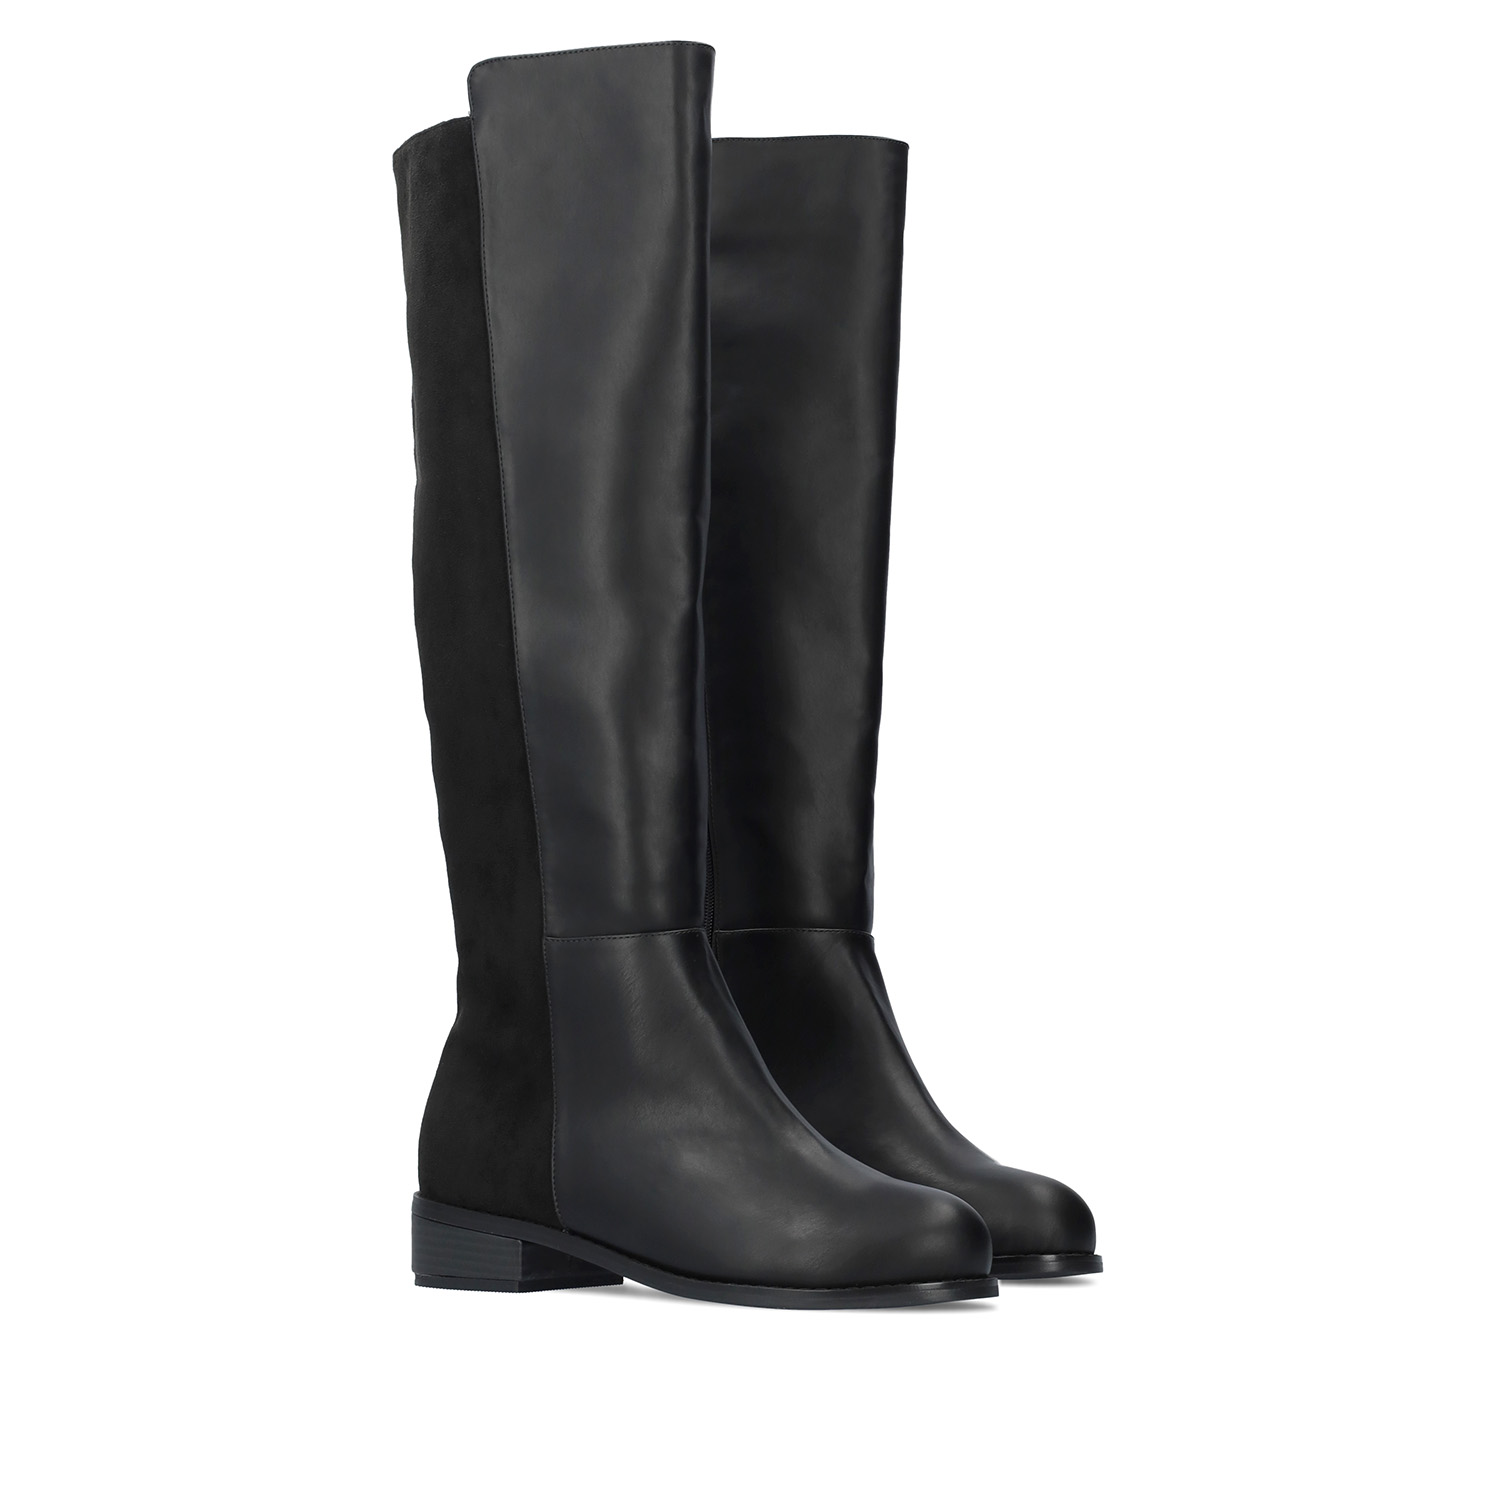 Flat knee-high boots combined in black colour. - Women, Boots, Women ...